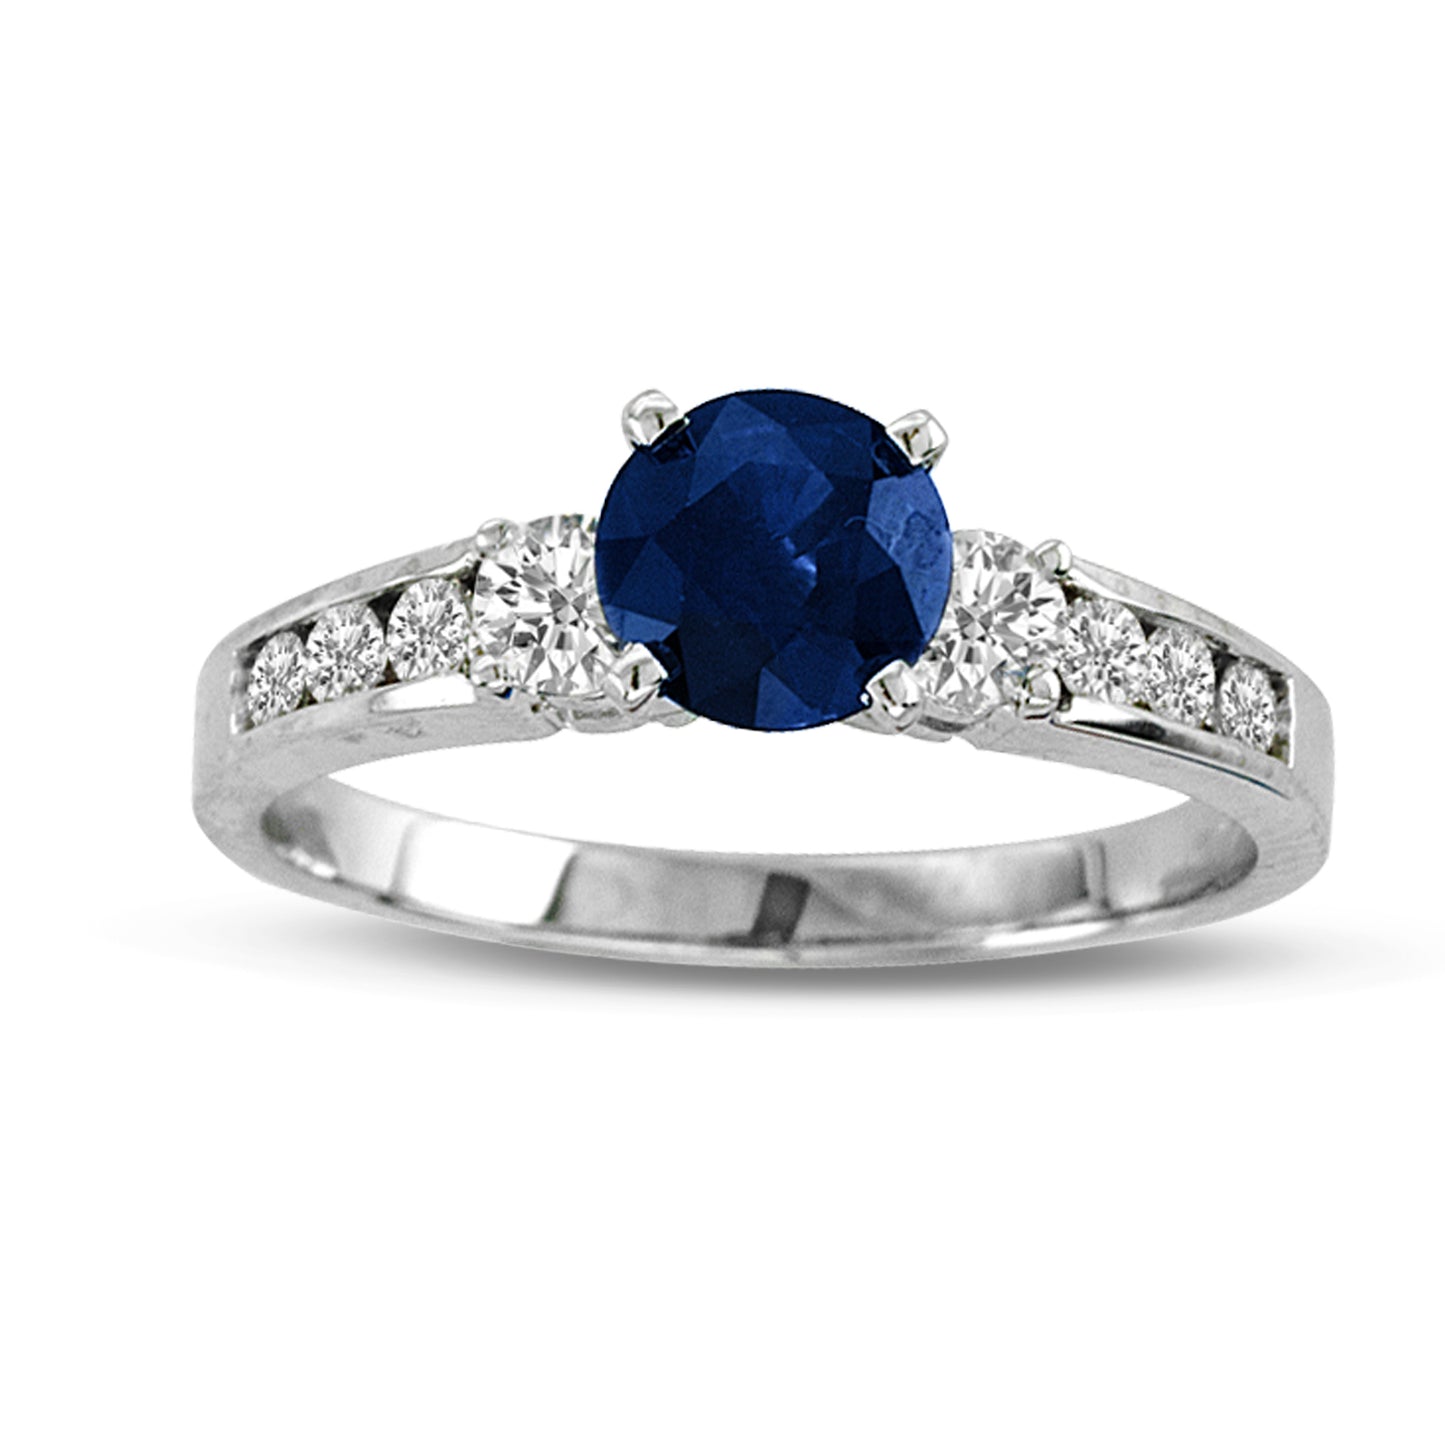 1 2/7ct Blue Sapphire & Diamond Engagement Ring in 14k White Gold